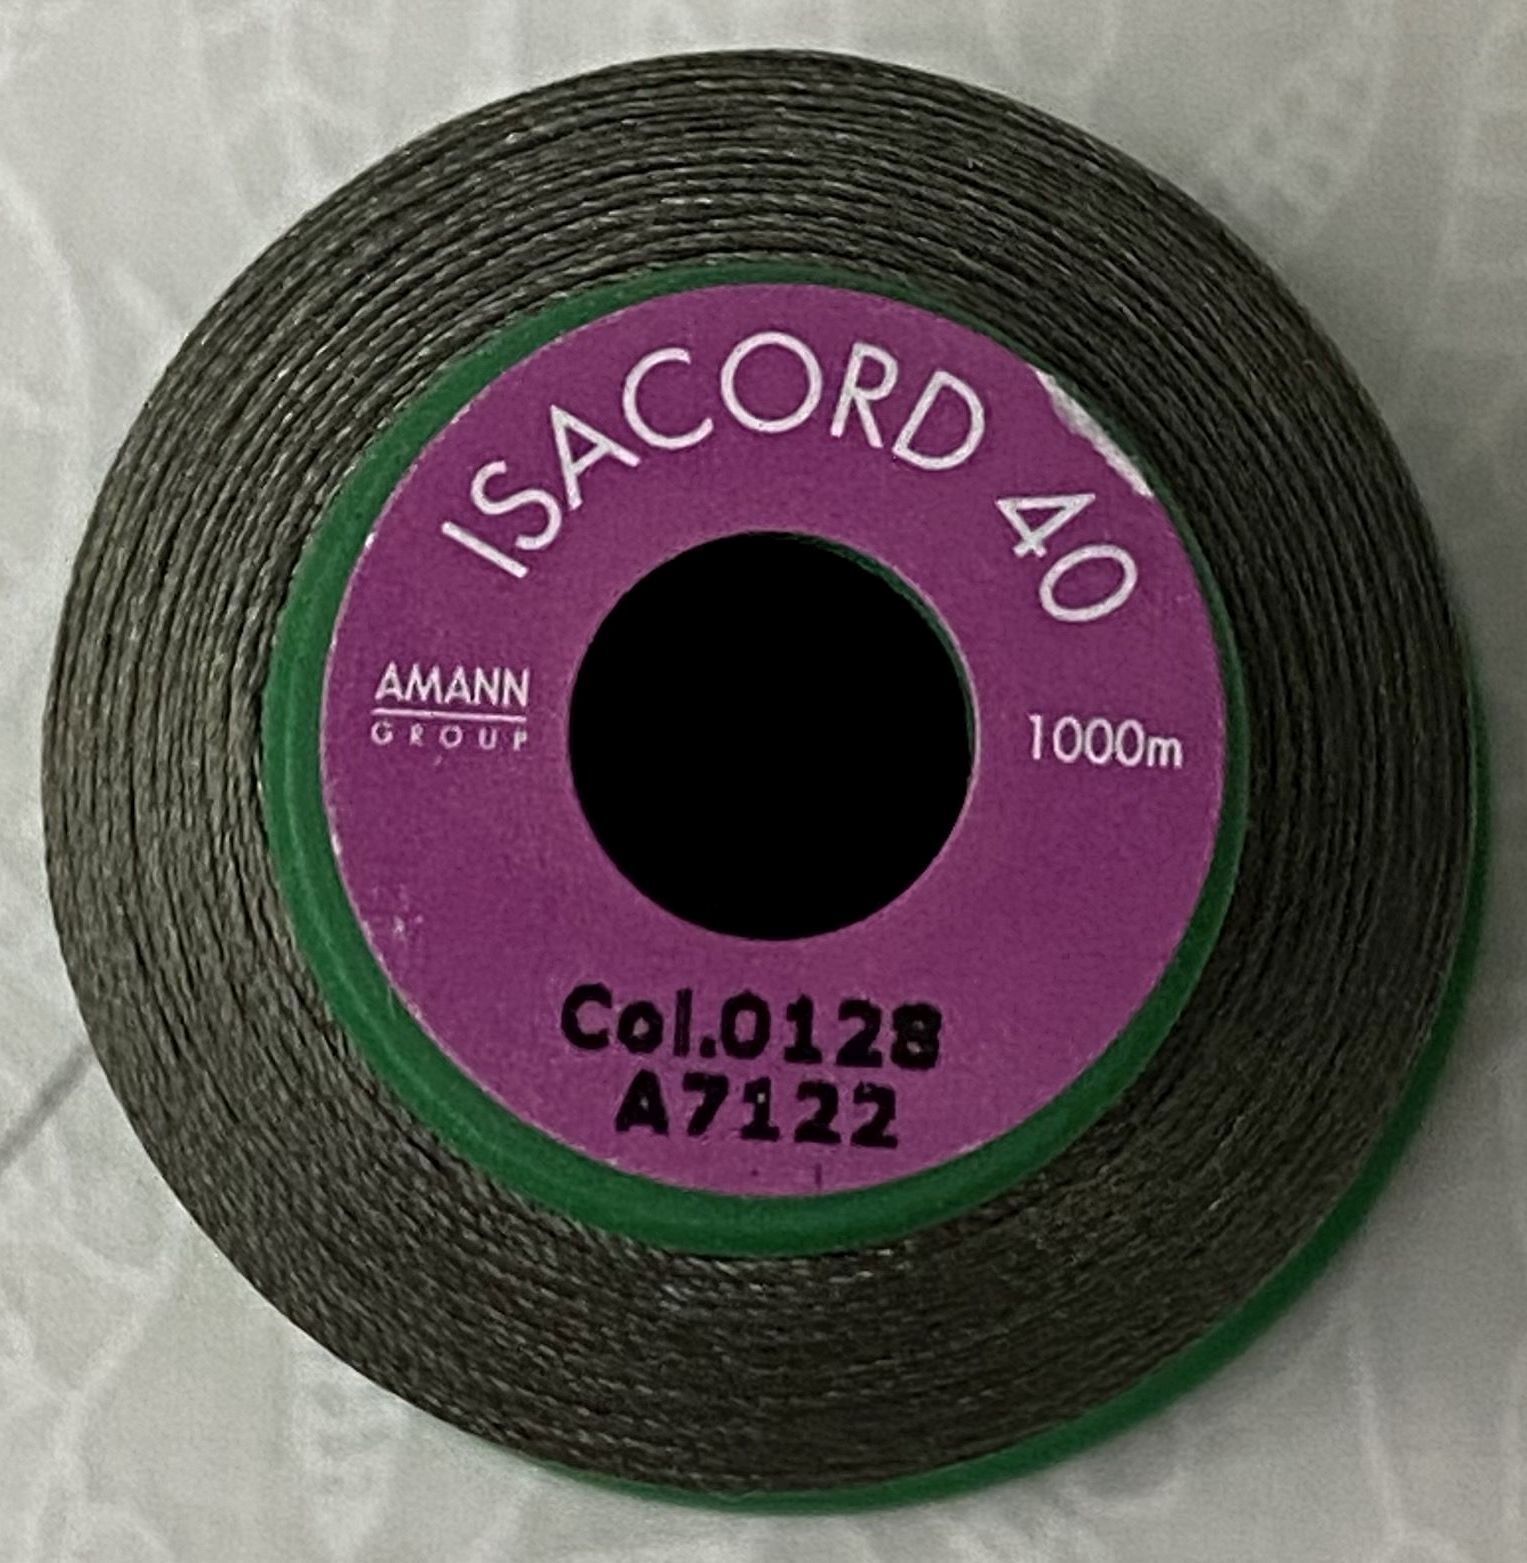 ISACORD 40 #0128 NAVAJO GREY 1000m Machine Embroidery Sewing Thread